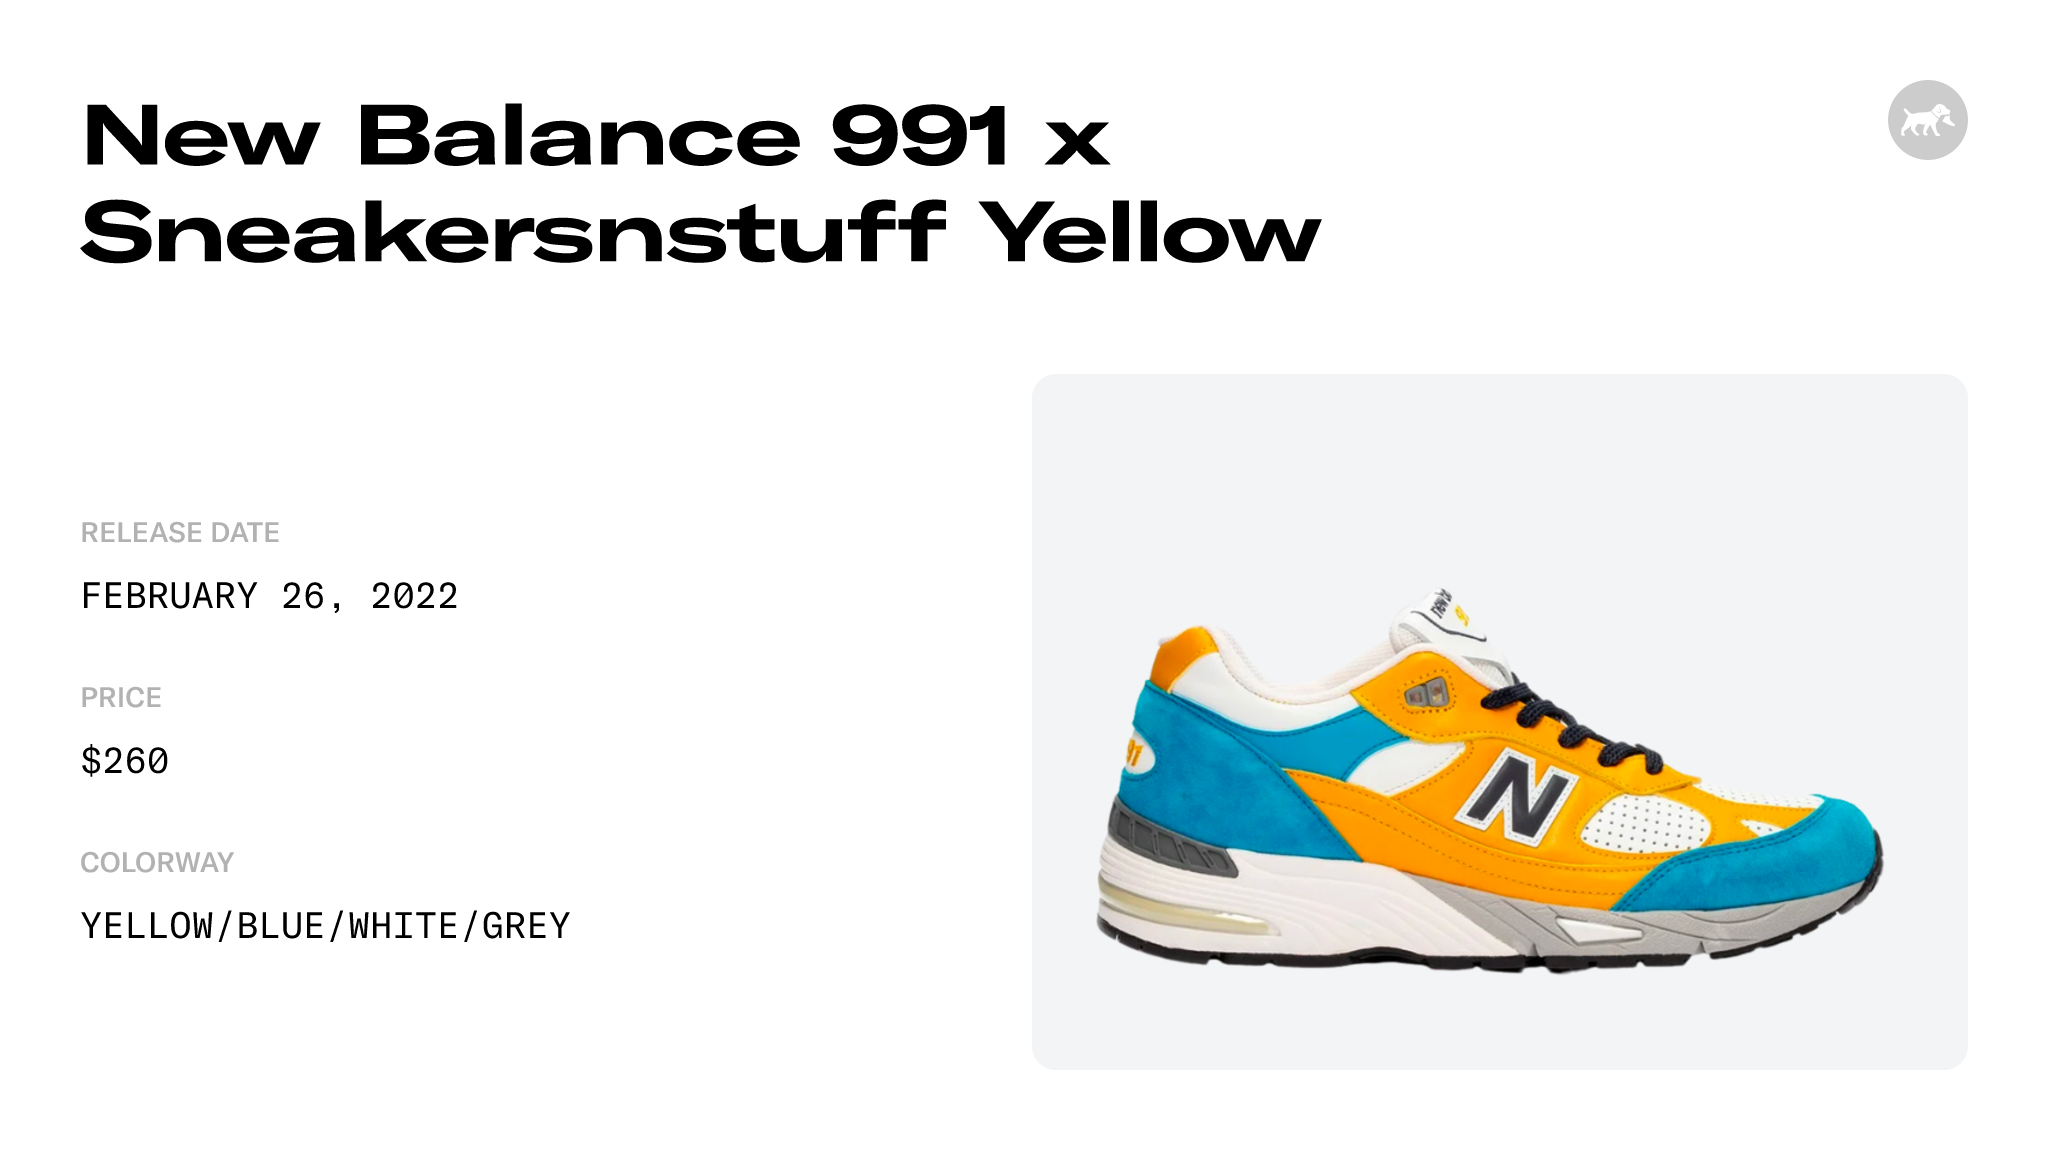 New Balance 991 x Sneakersnstuff Yellow - M991ef Raffles and Release Date